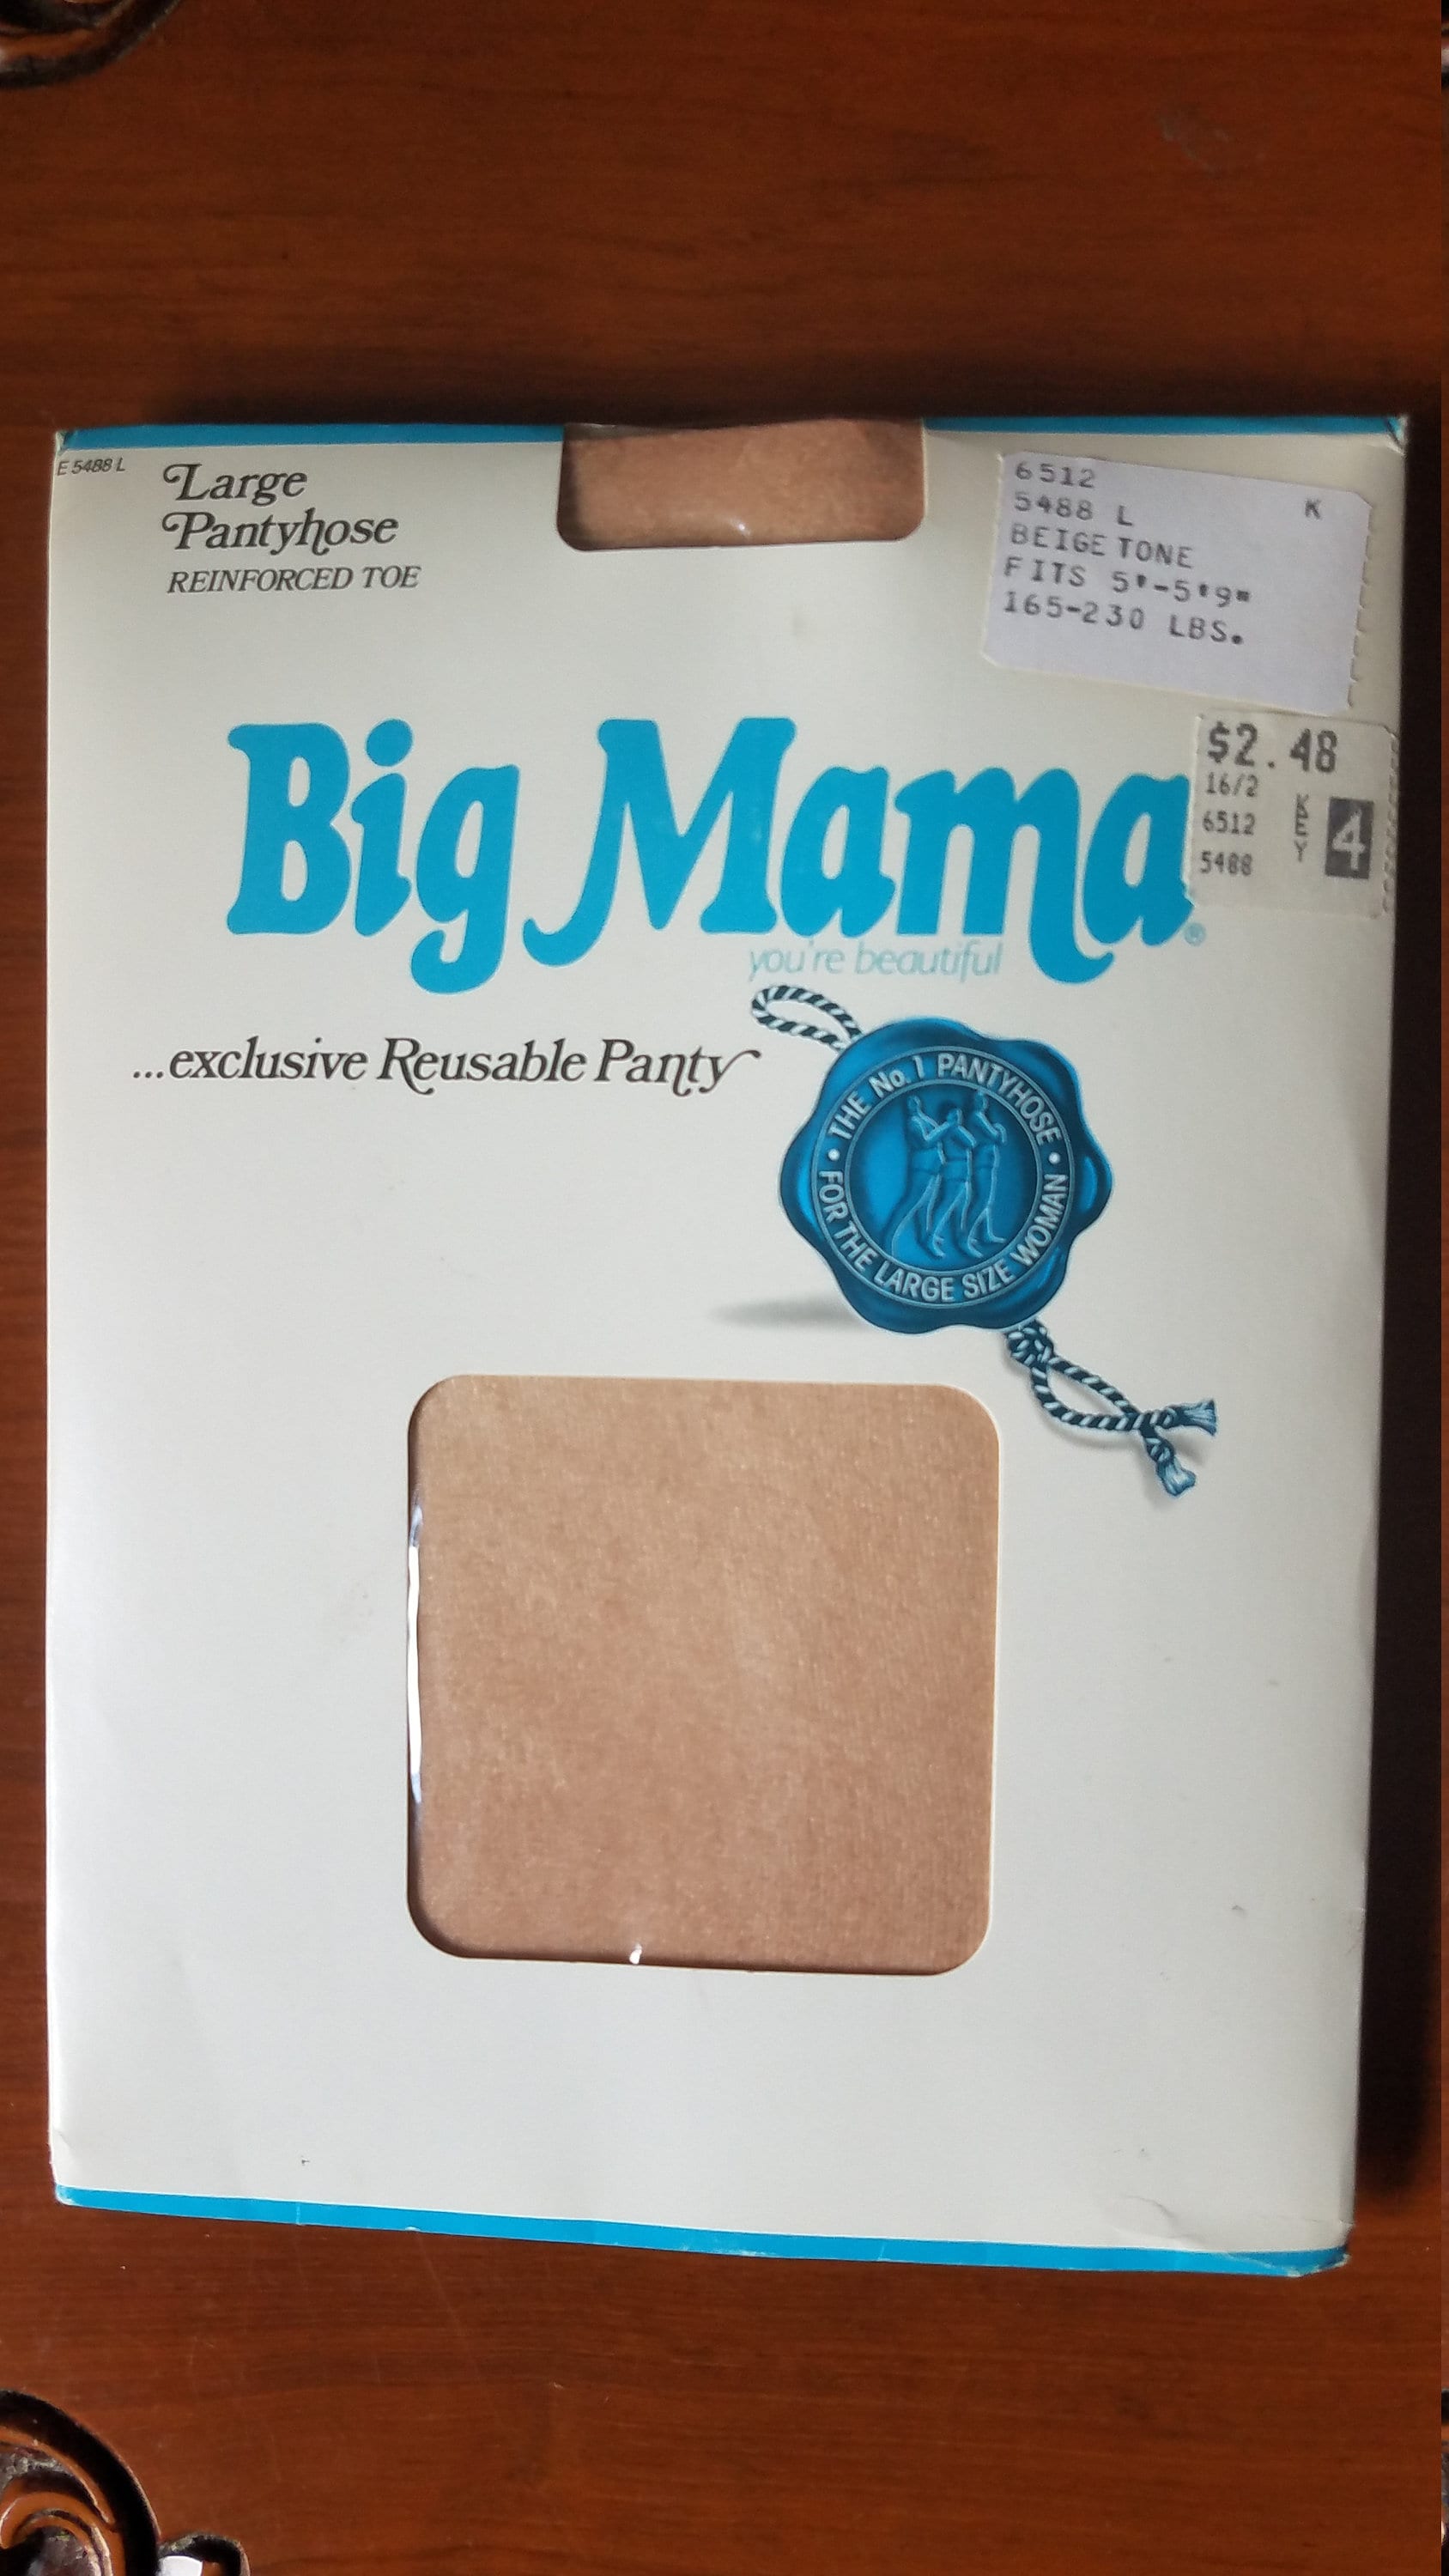 Large Size 44-54 hips 150-200 pounds Vintage Deadstock Pantyhose Beige Nylons by Big Mama